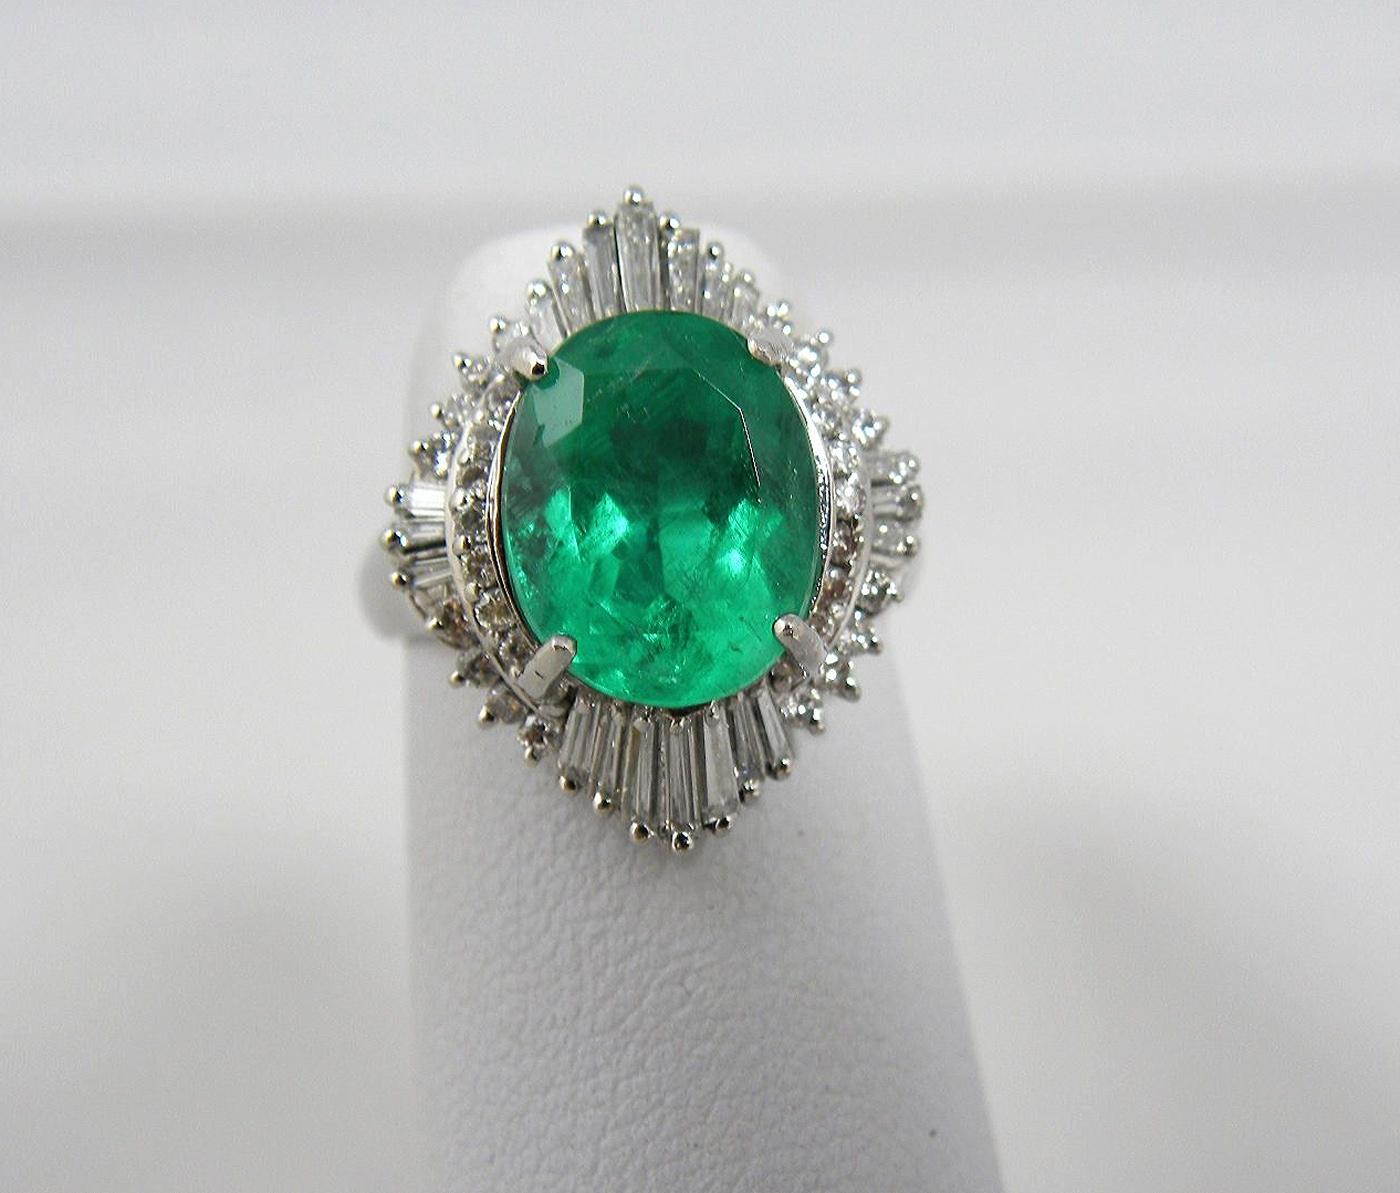 Stunning 5.81 Carat Fine Colombian Emerald Diamond Platinum Engagement Estate Engagement Wedding Ring
The Emerald Platinum ring is composed by a 5.00 carat natural Colombian Emeralds oval cut at the center surround by baguette diamonds 0.81 carat.